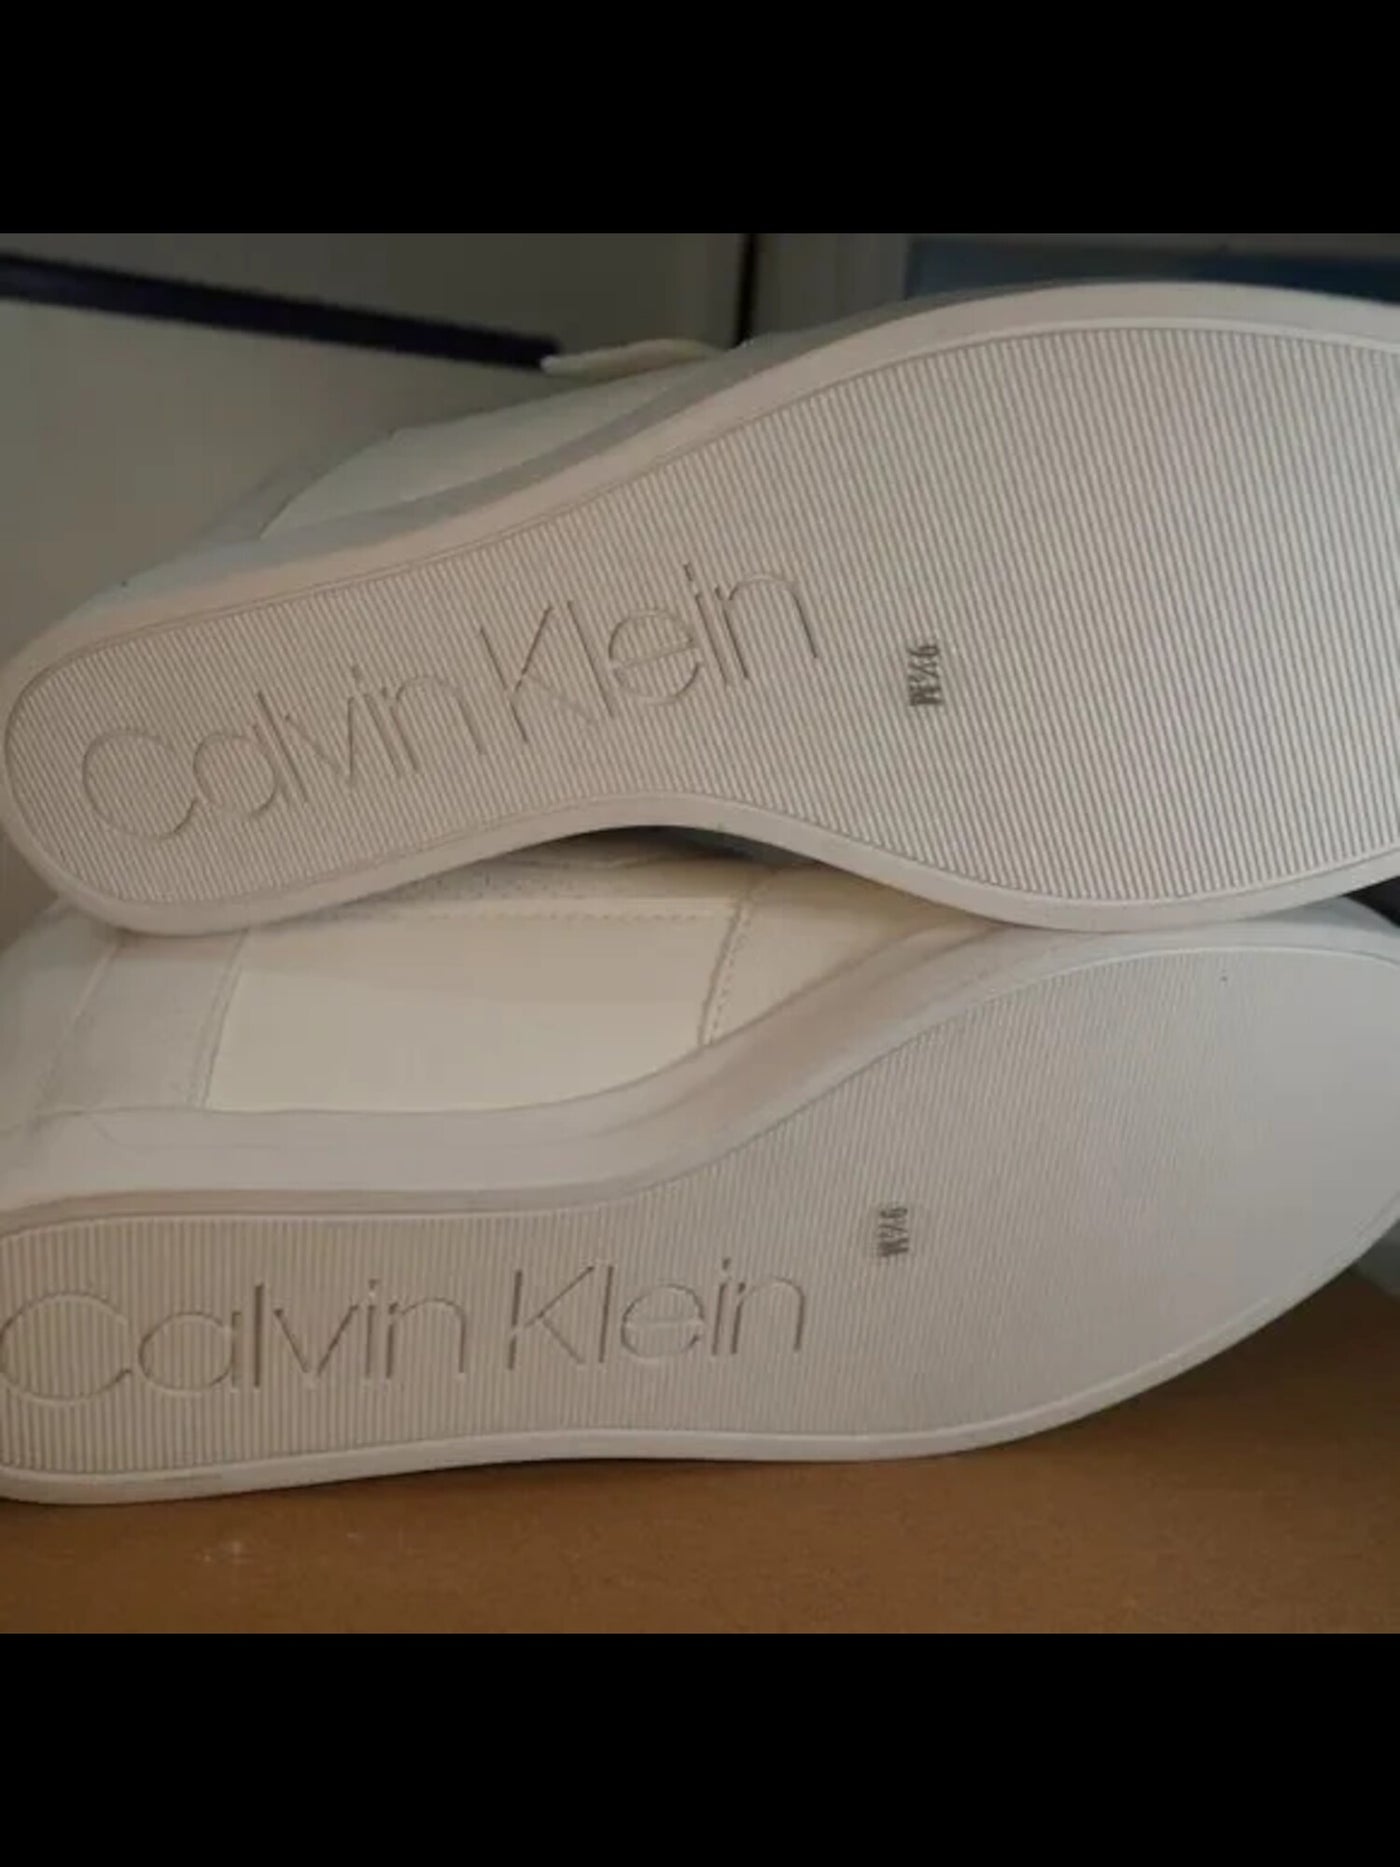 CALVIN KLEIN Womens White Strap Perforated Hidden Heel Logo Frances Round Toe Wedge Lace-Up Leather Athletic Sneakers Shoes M